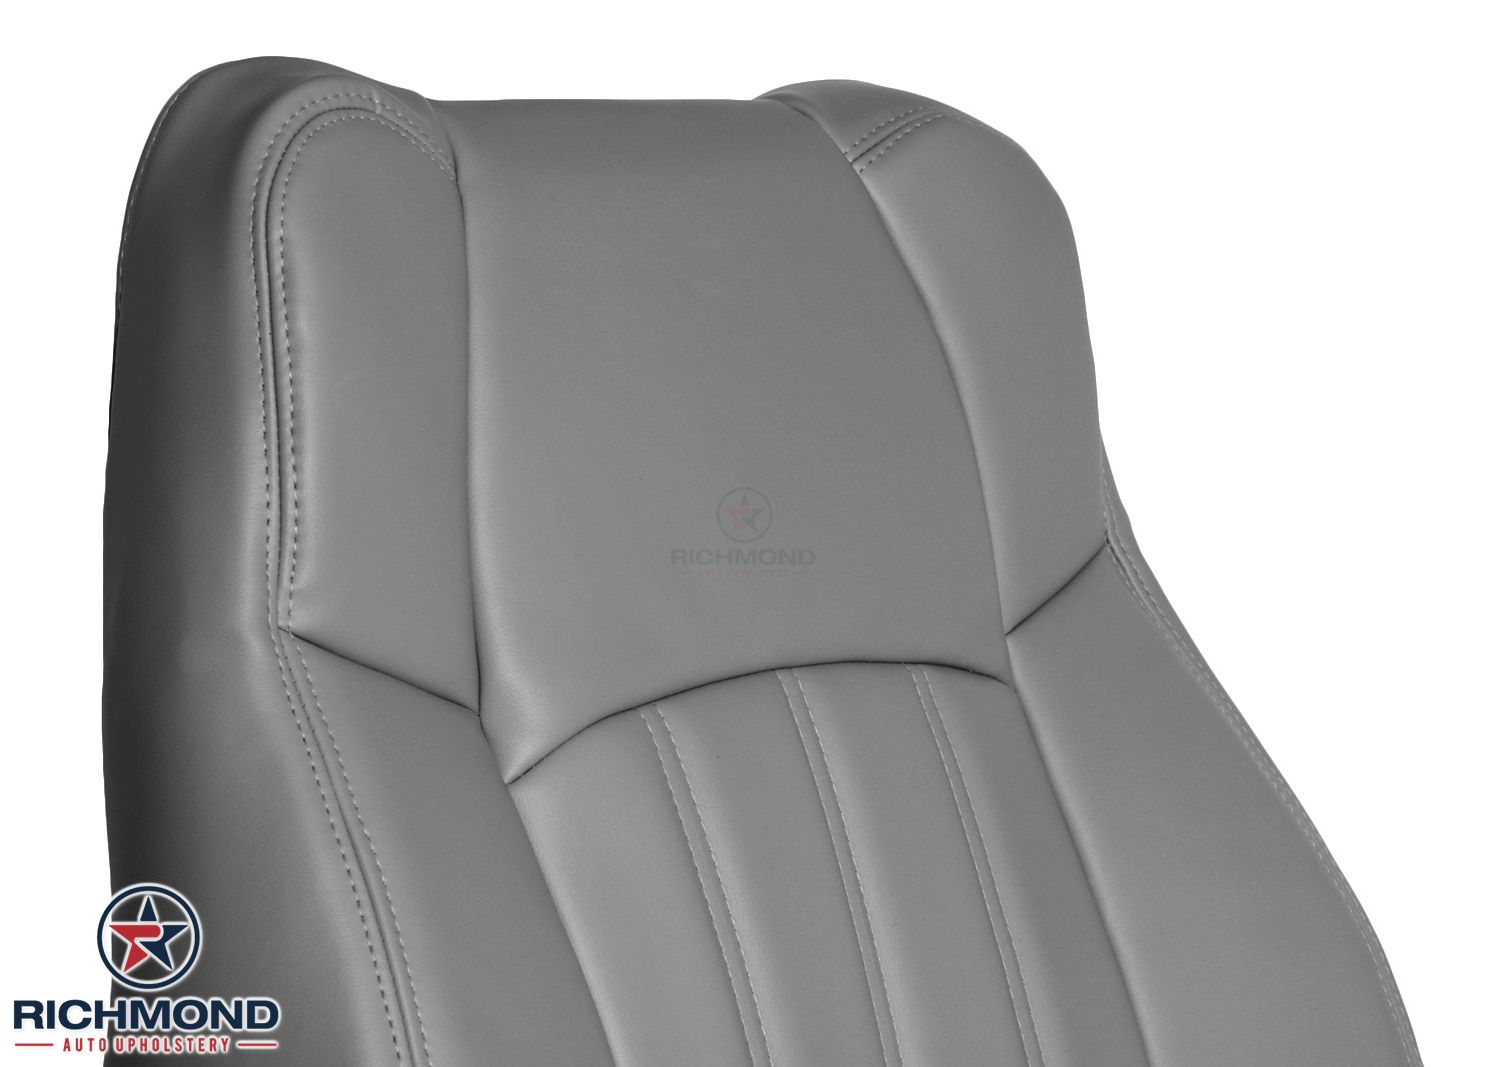 2006 2007 Chrysler 300 C 300C -Driver Side Lean Back Leather Seat Cover Gray | eBay Car Seat Covers For 2006 Chrysler 300